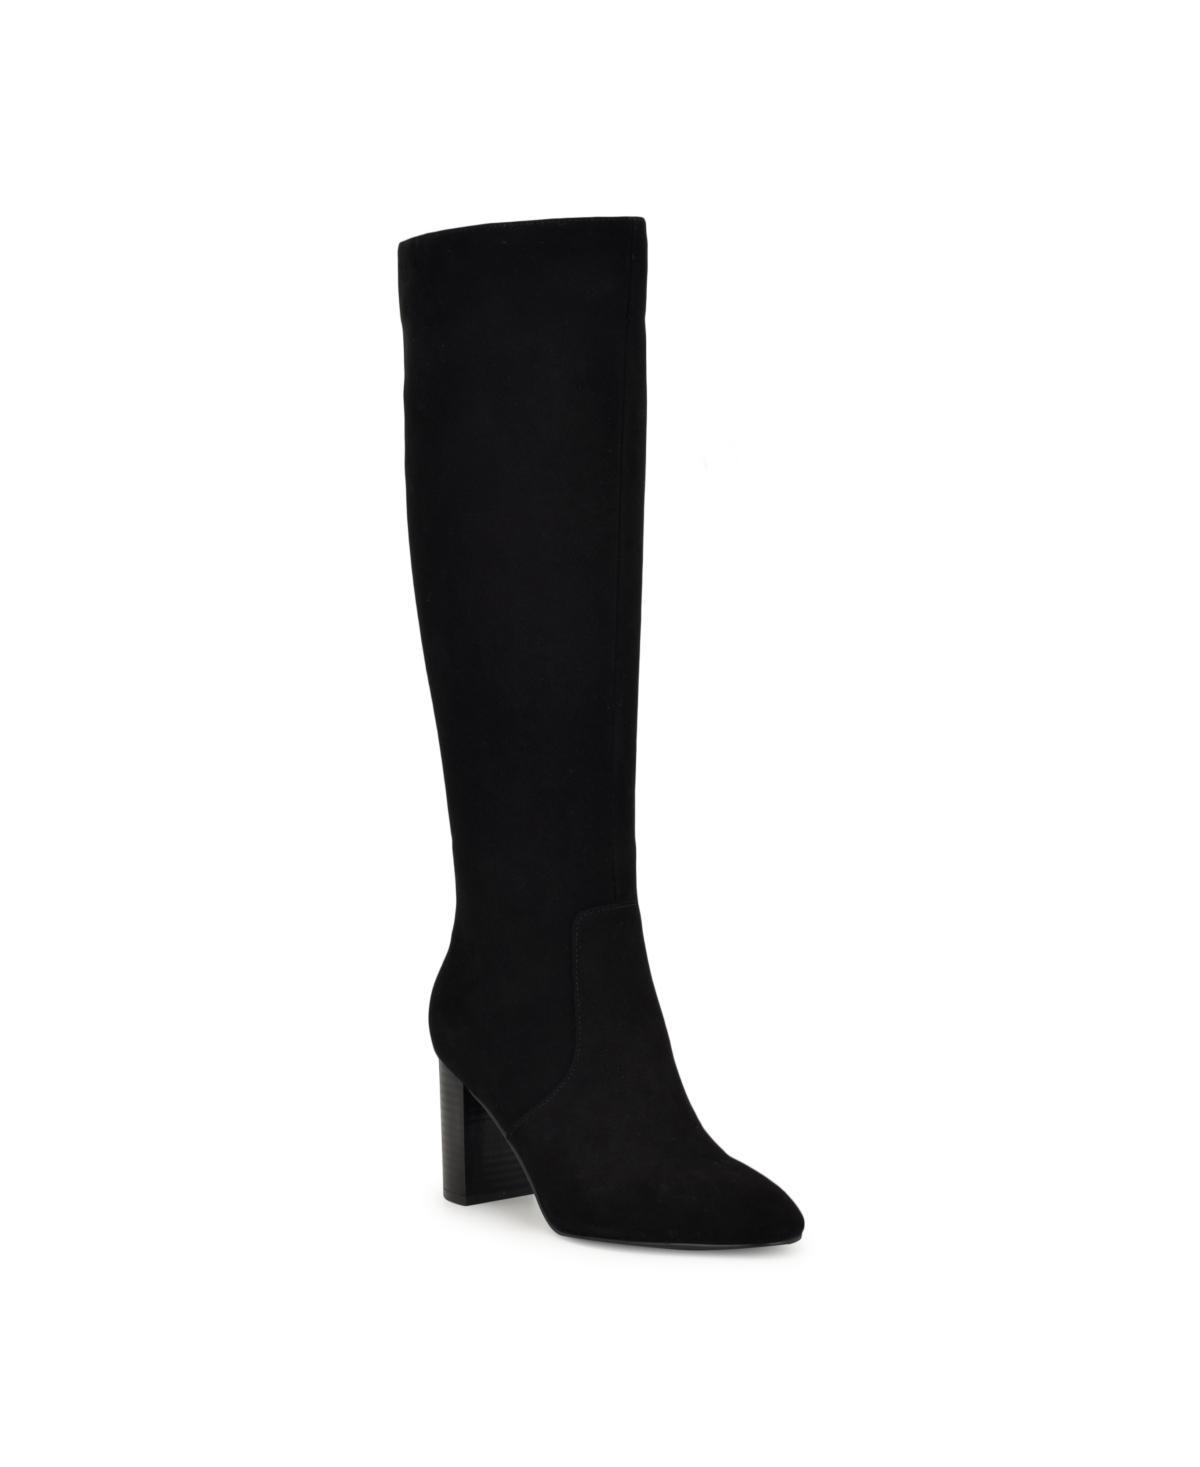 Nine West Womens Otton Stacked Block Heel Dress Wide Calf Boots Womens Shoes Product Image